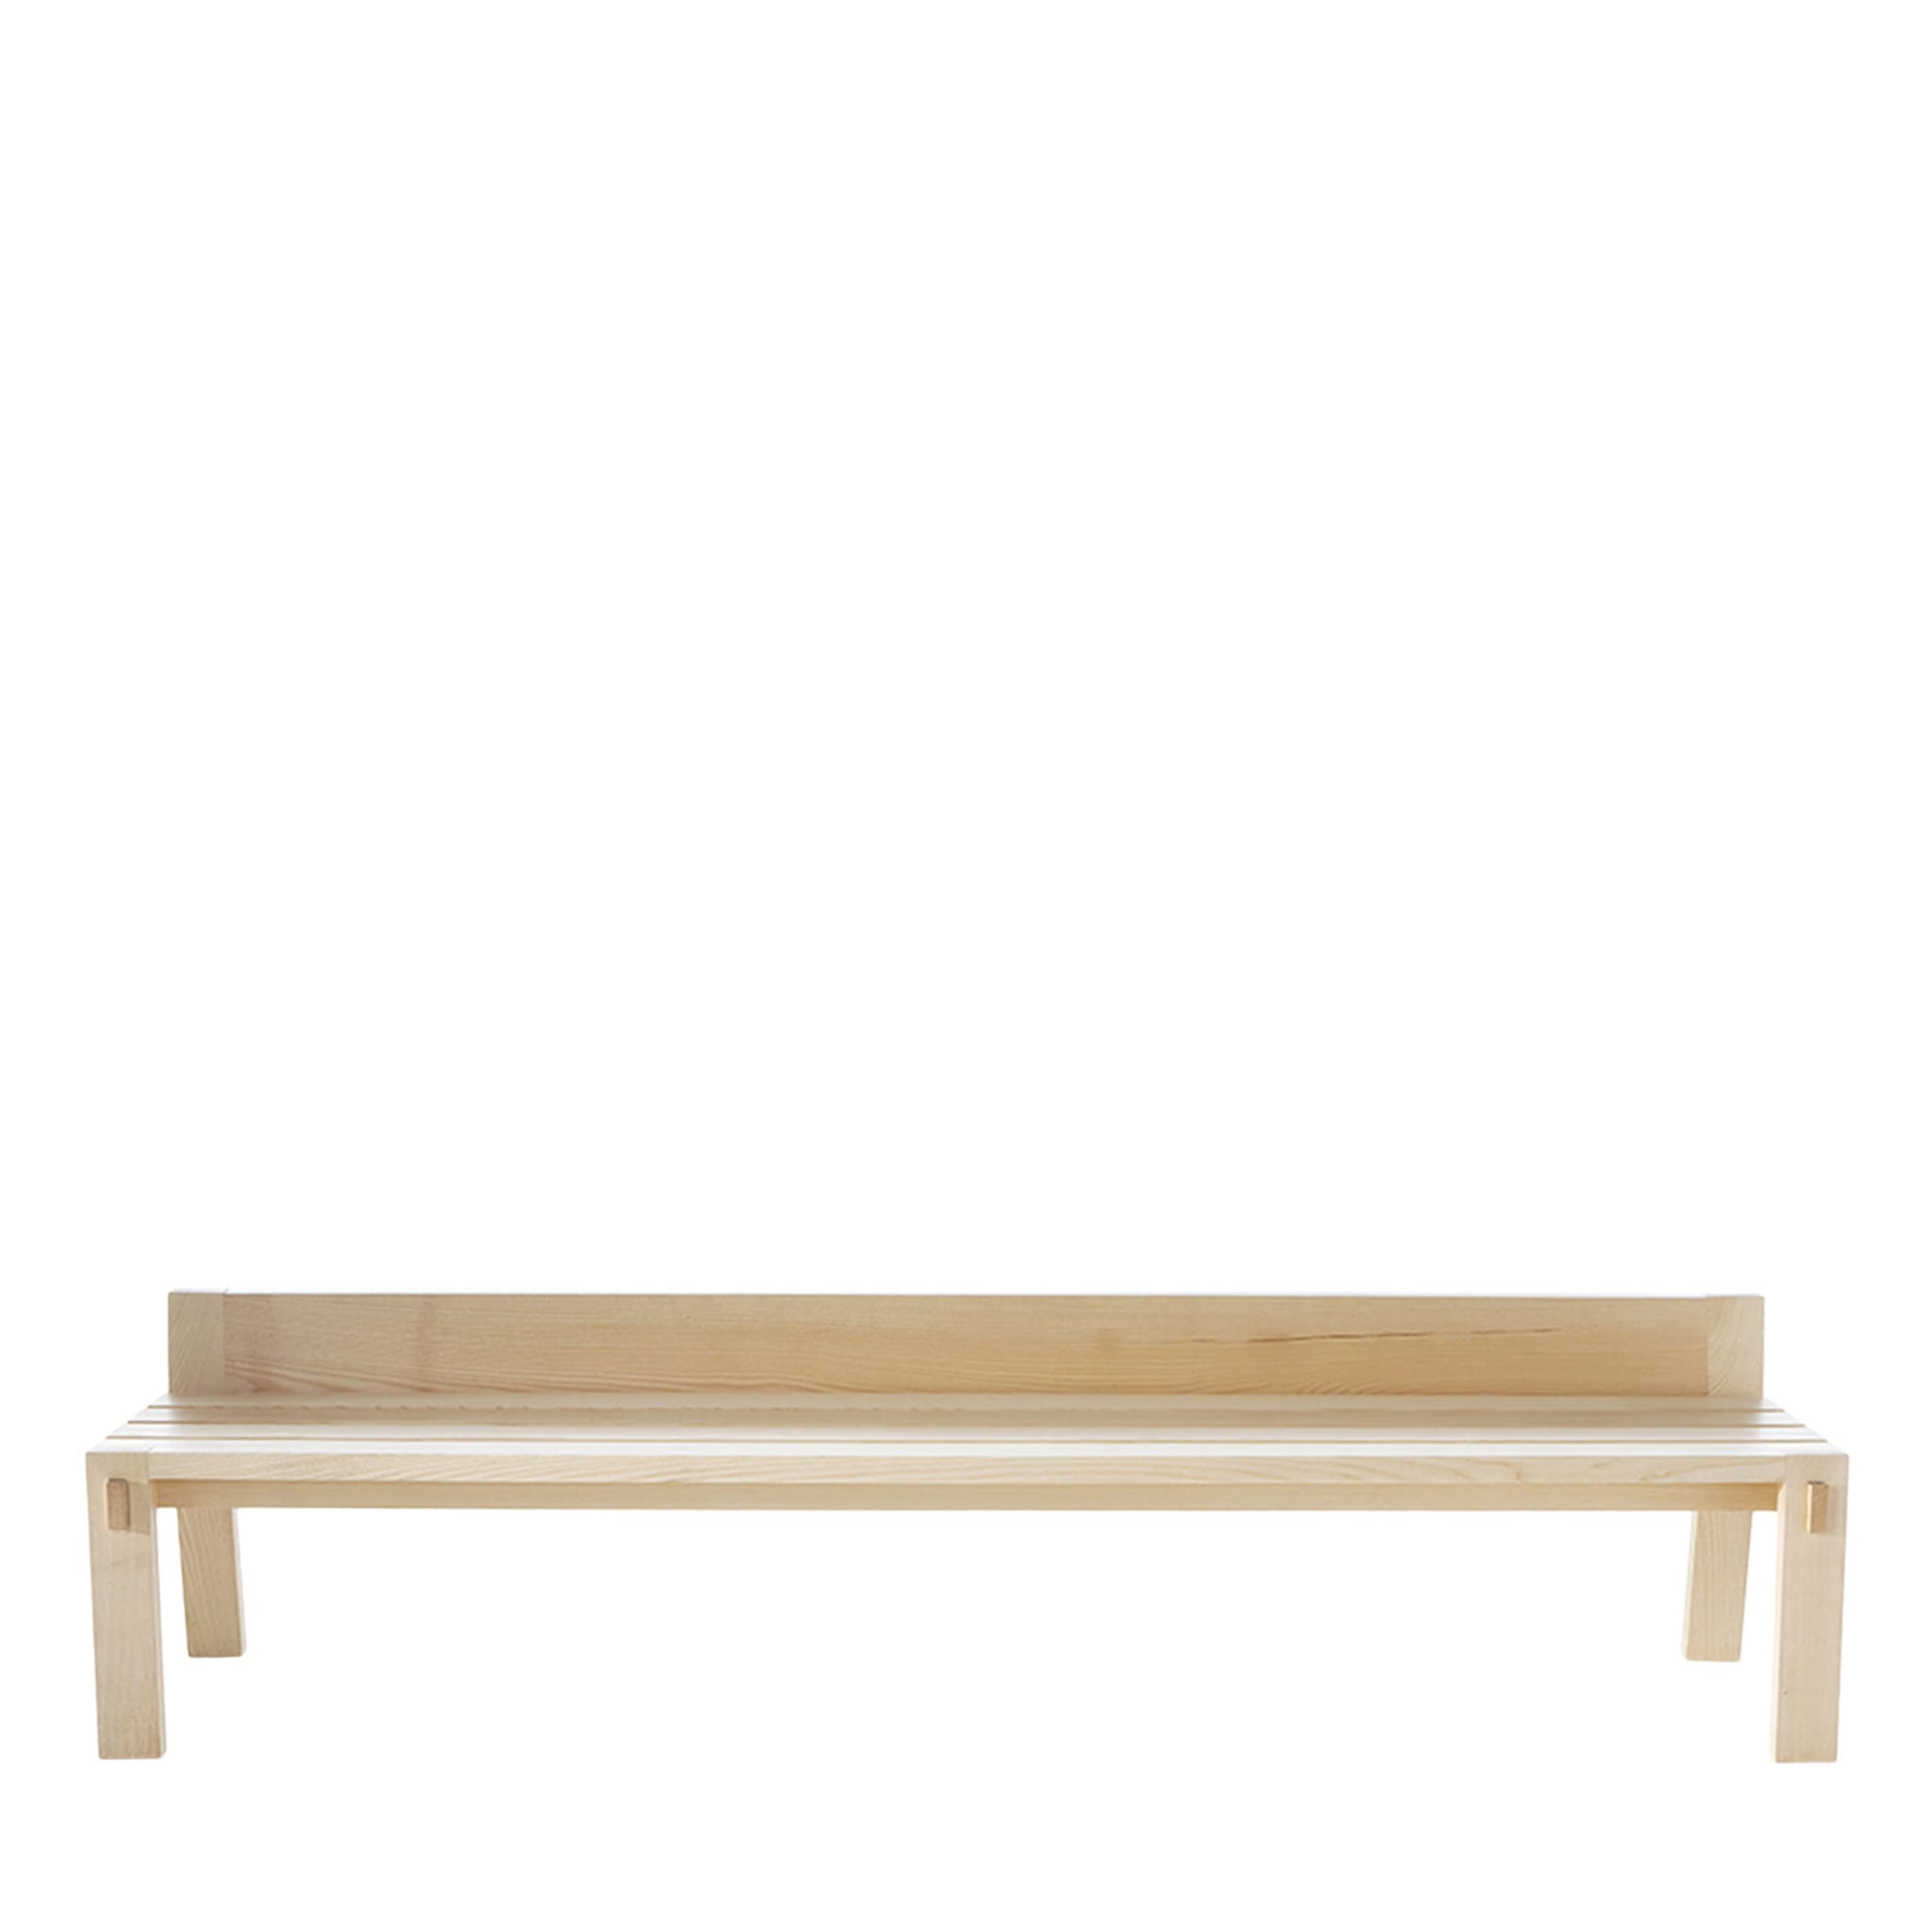 Hortus Bench by Jean-Michel Wilmotte - Main view